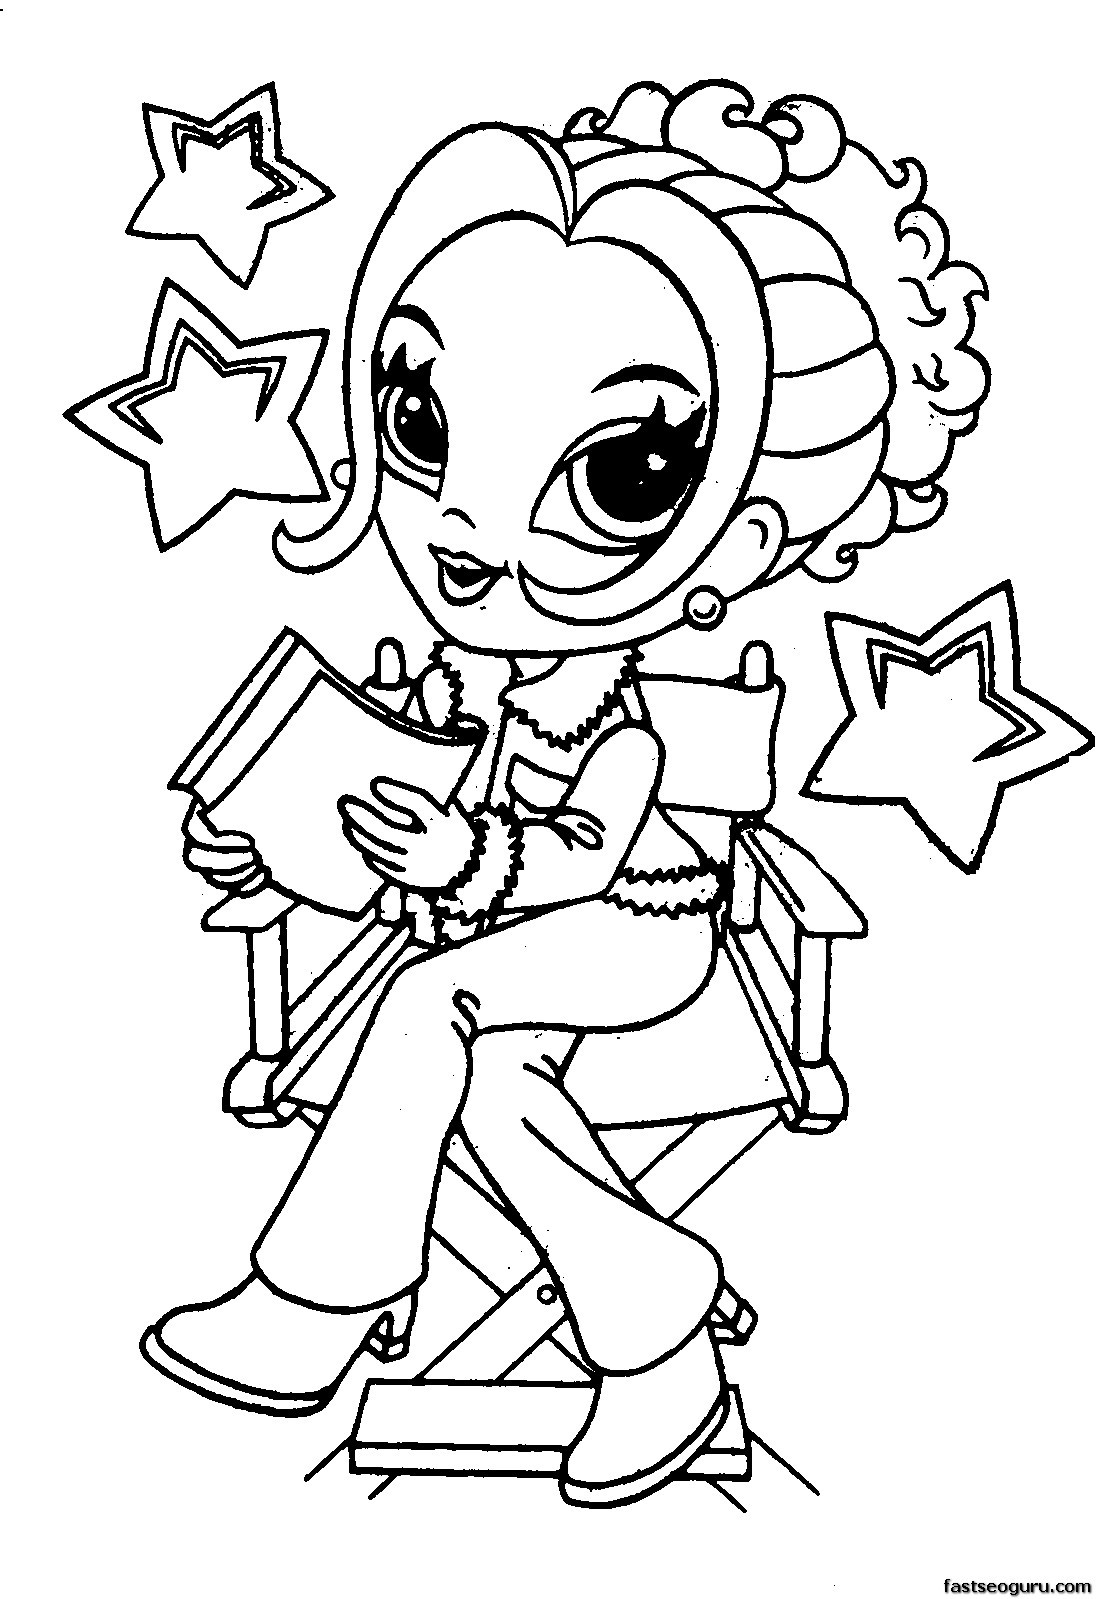 Coloring Book Pages For Girls
 coloring pages for girls 10 and up